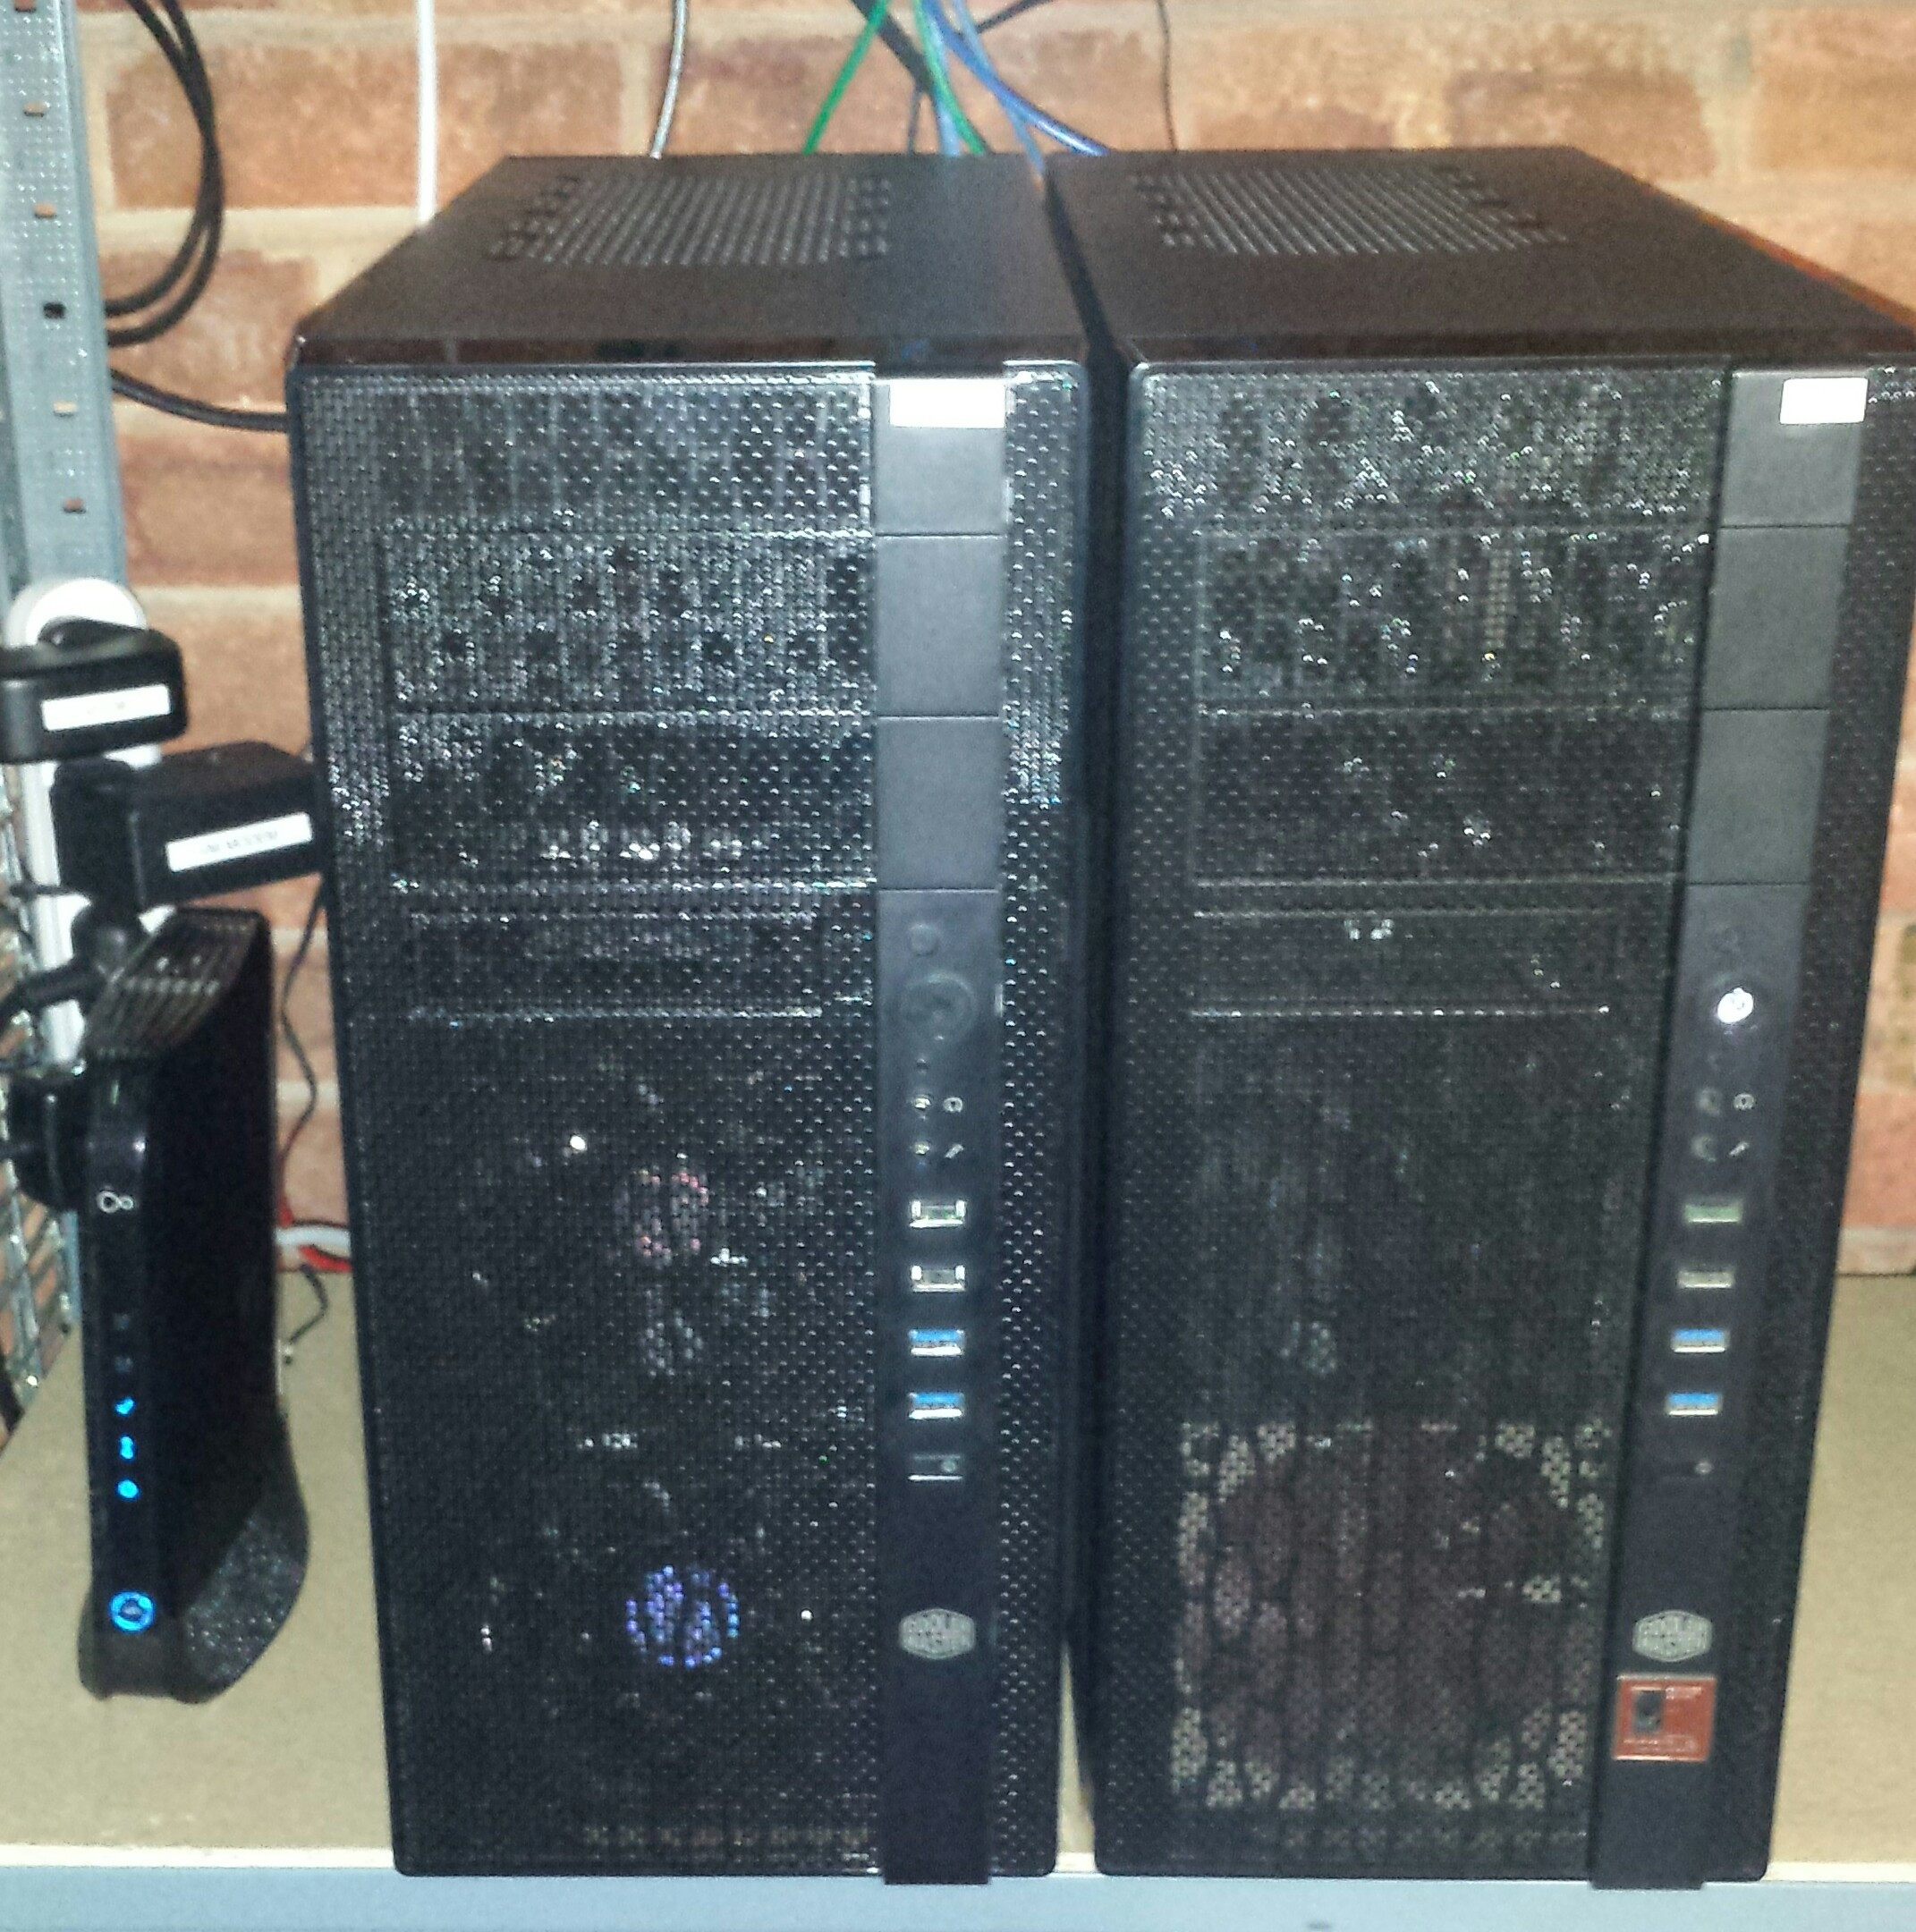 The first two home servers I built